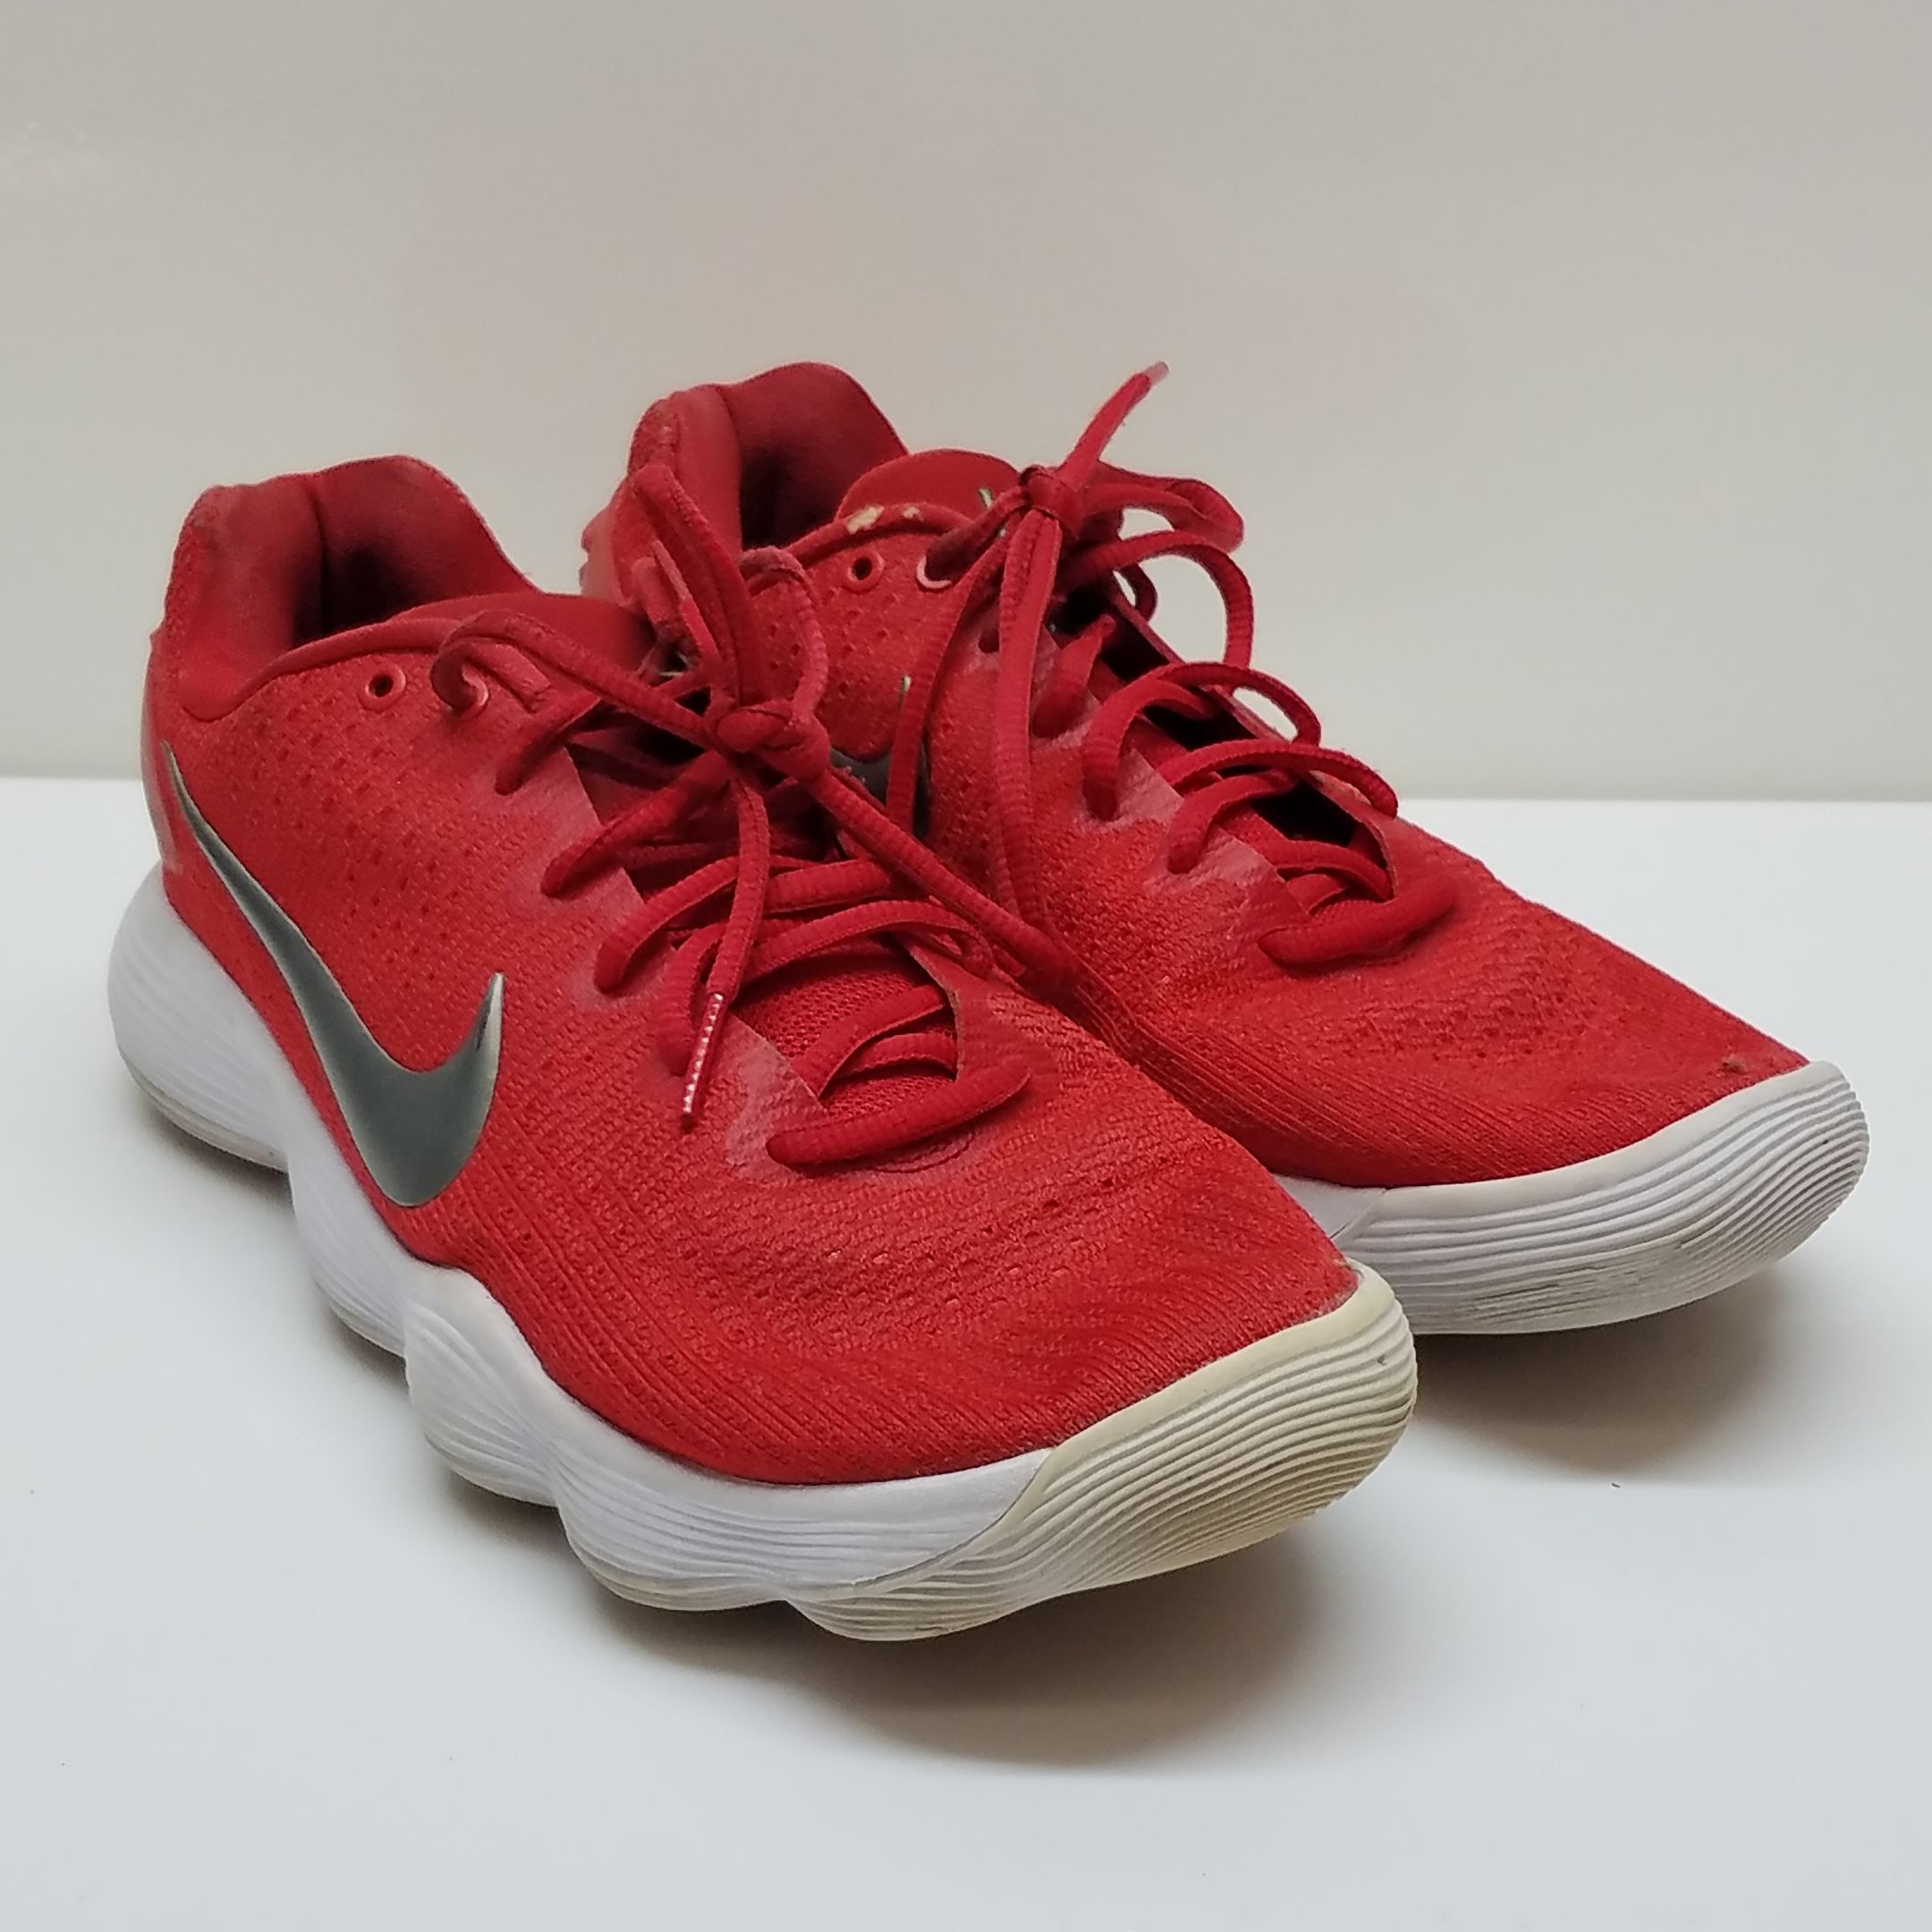 the Nike Hyperdunk Low 2017 Basketball Shoes Red/White Men's Size 10 | GoodwillFinds